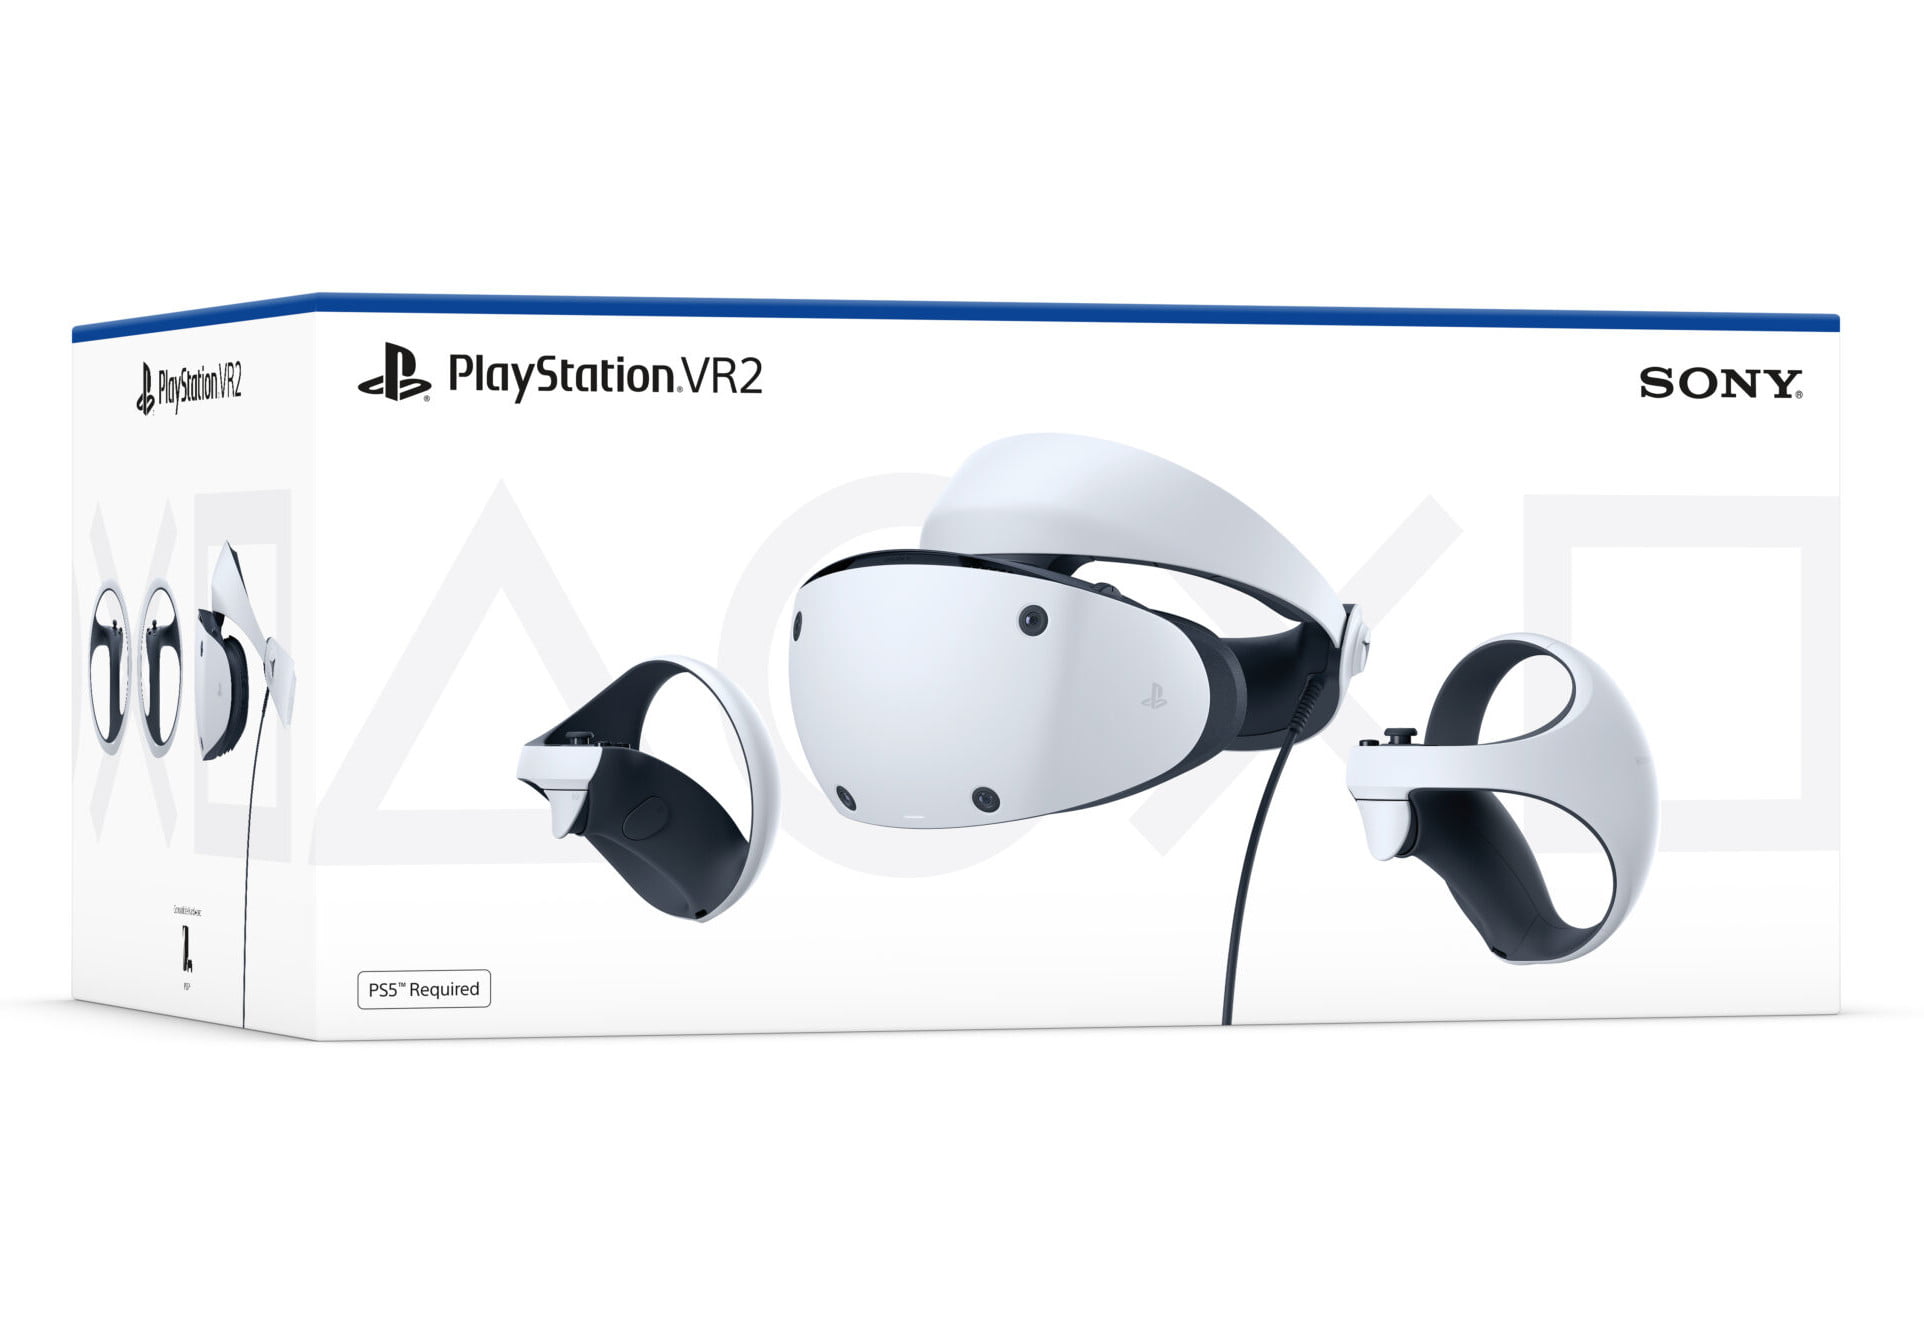 Playstation VR 2 finally available at Amazon, Best Buy and more